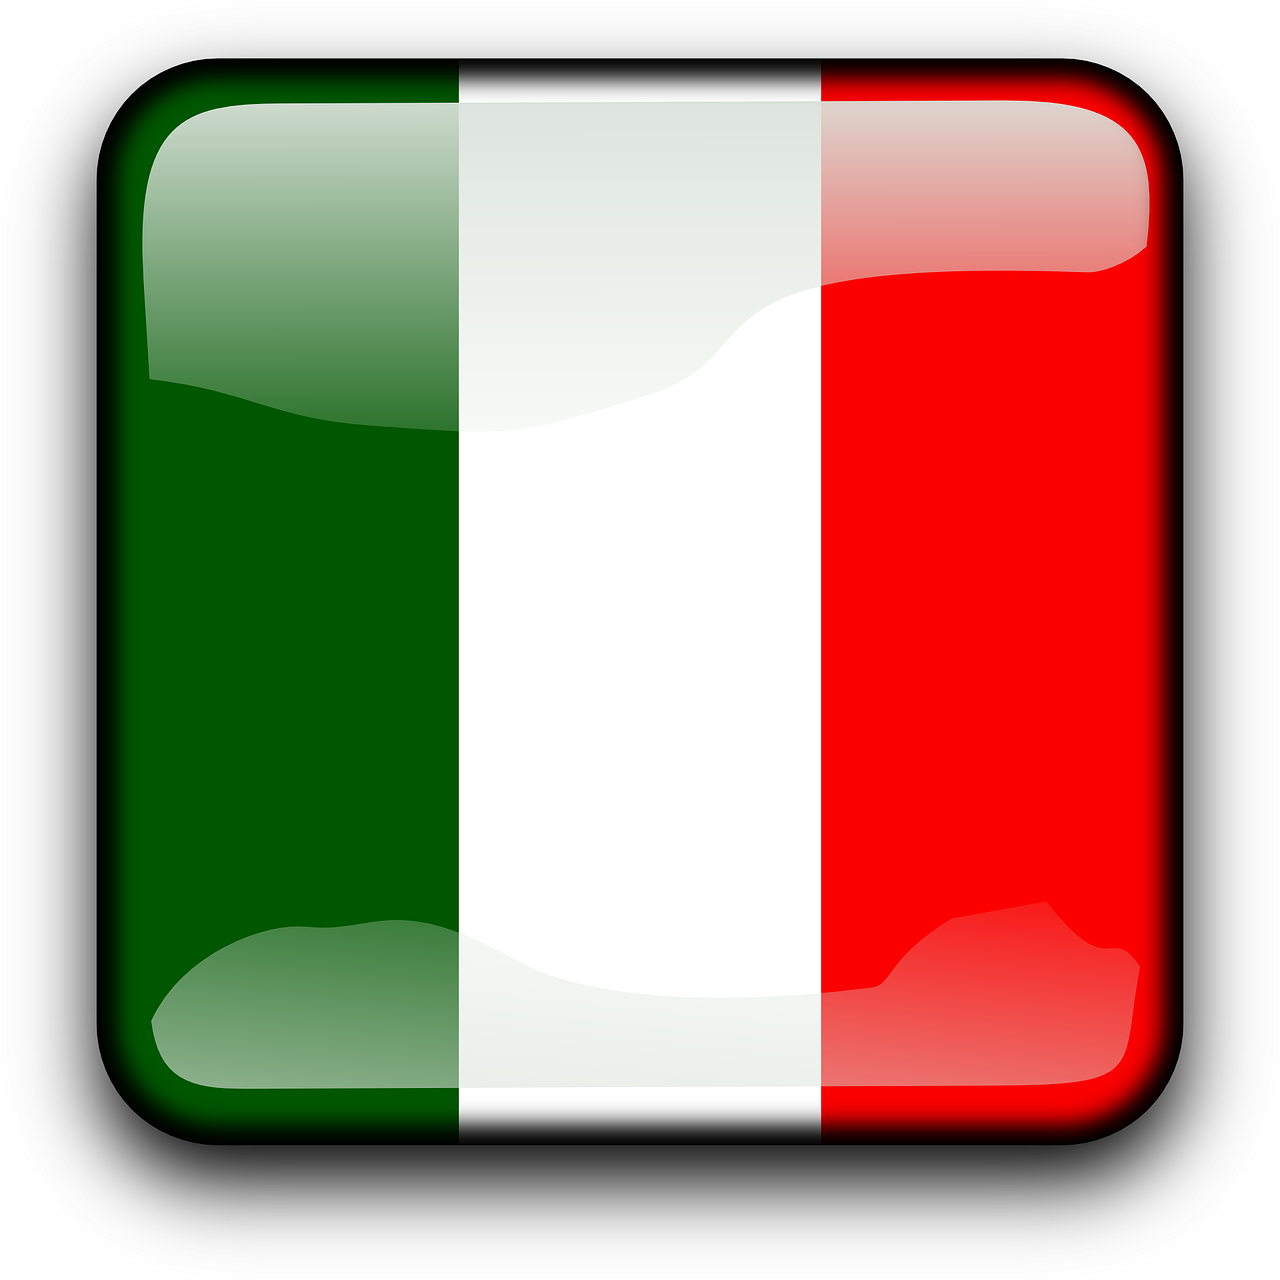 italy-g2557cbc12_1280.png